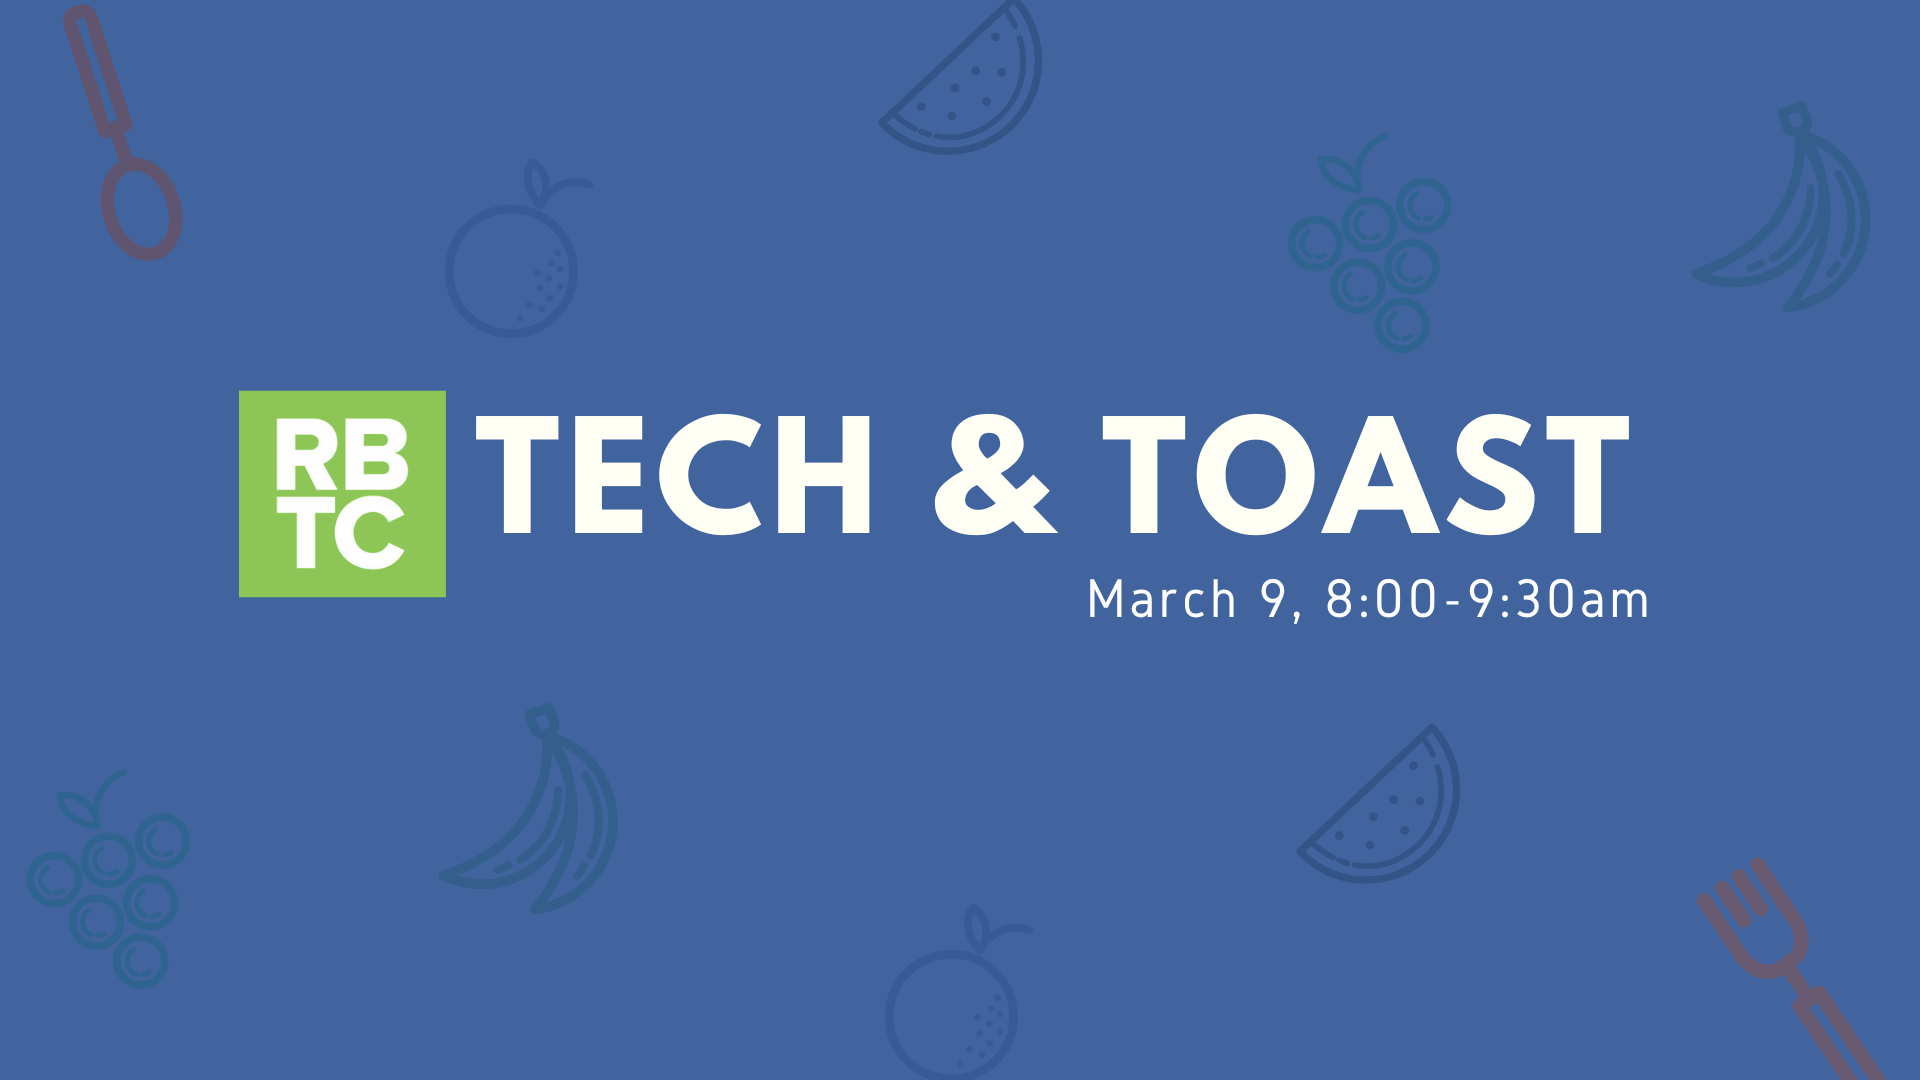 RBTC Tech & Toast with MELD Manufacturing